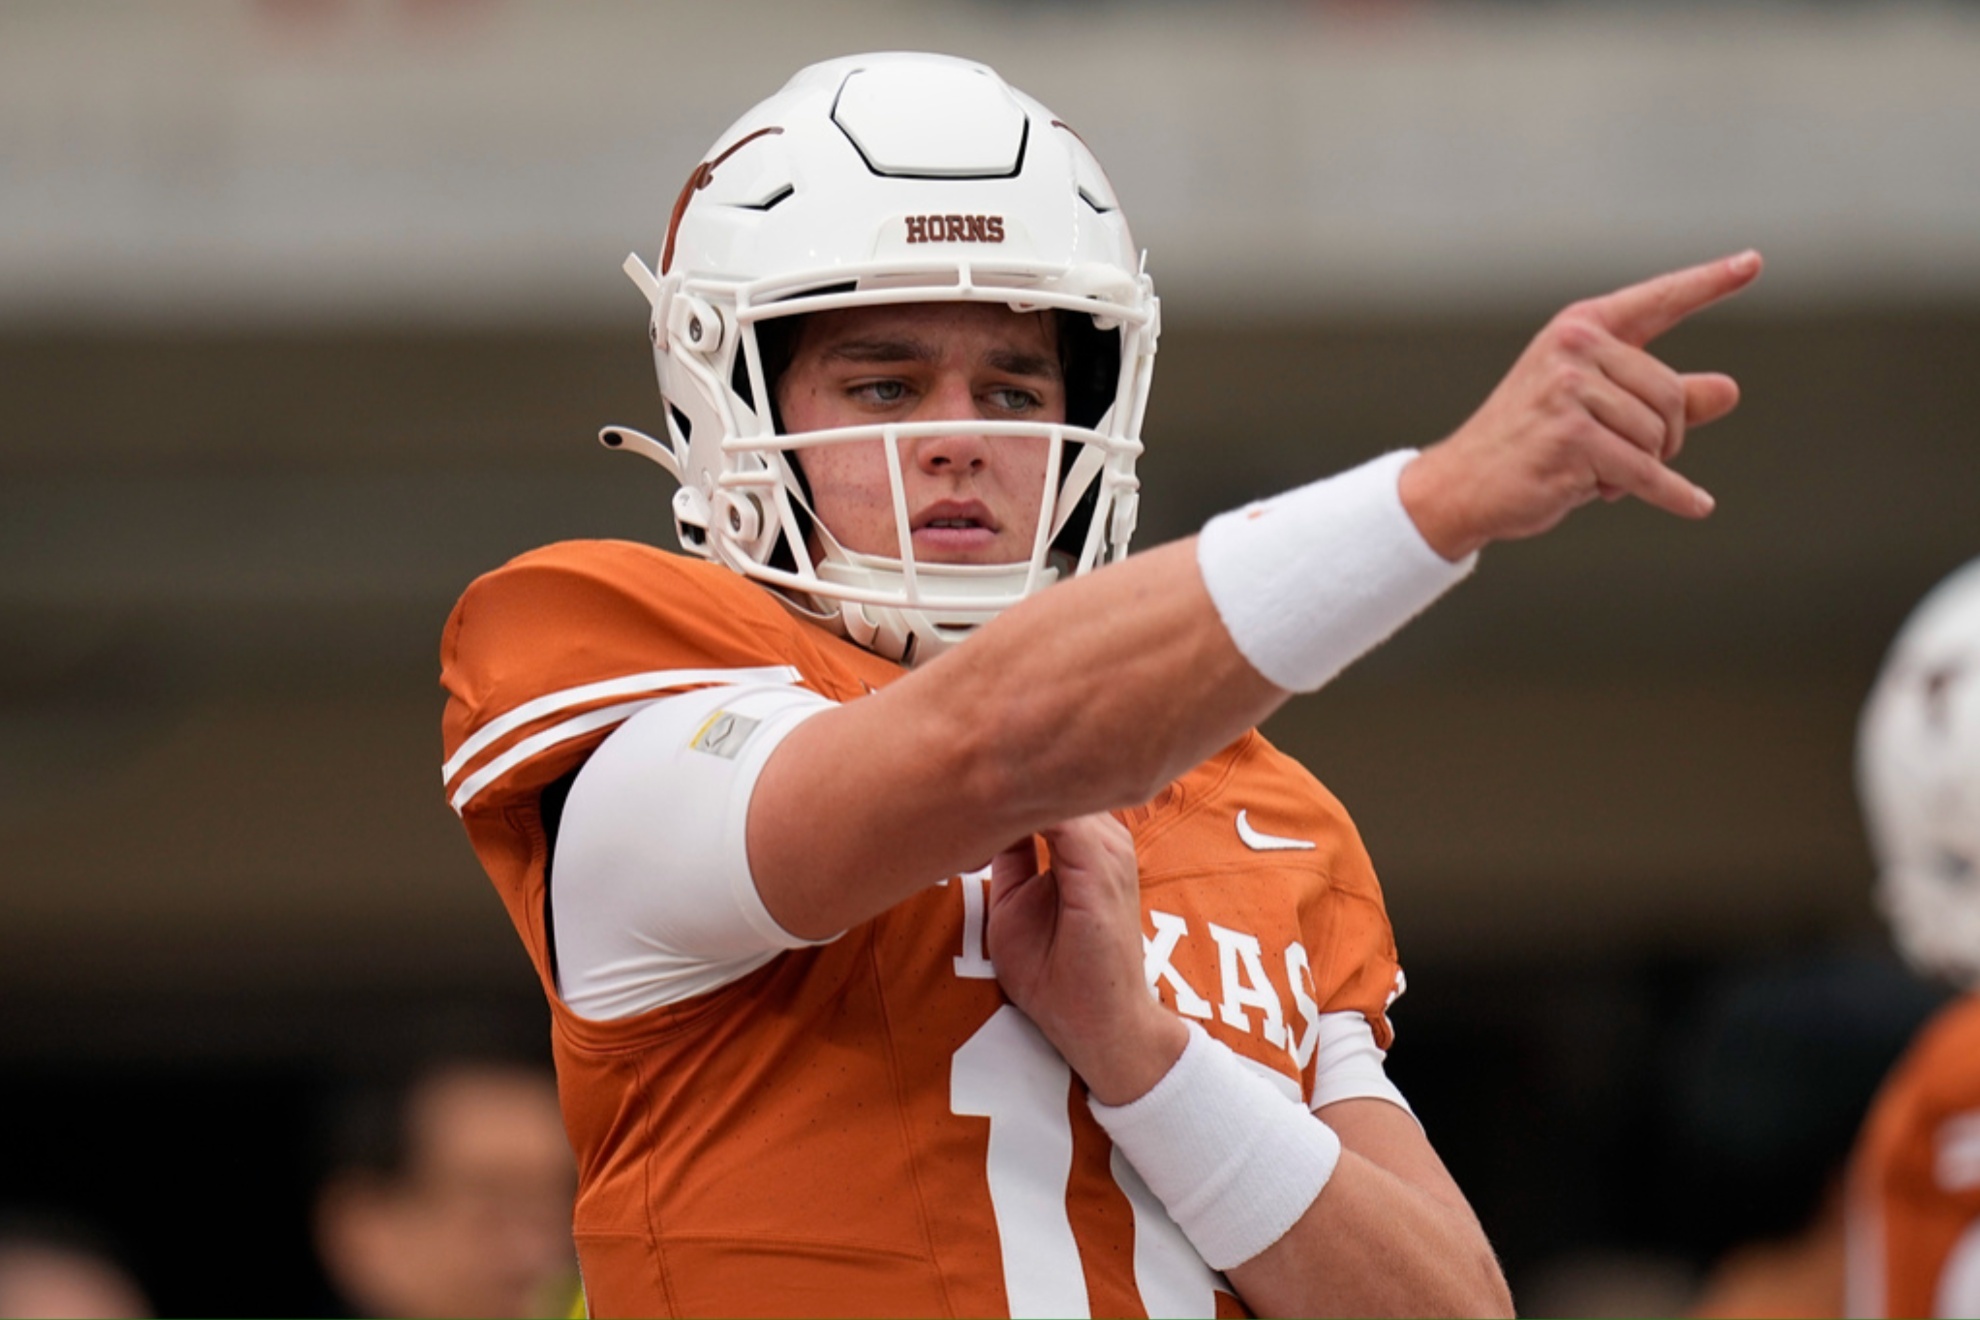 Arch Manning made his NCAA debut on Friday against Texas Tech